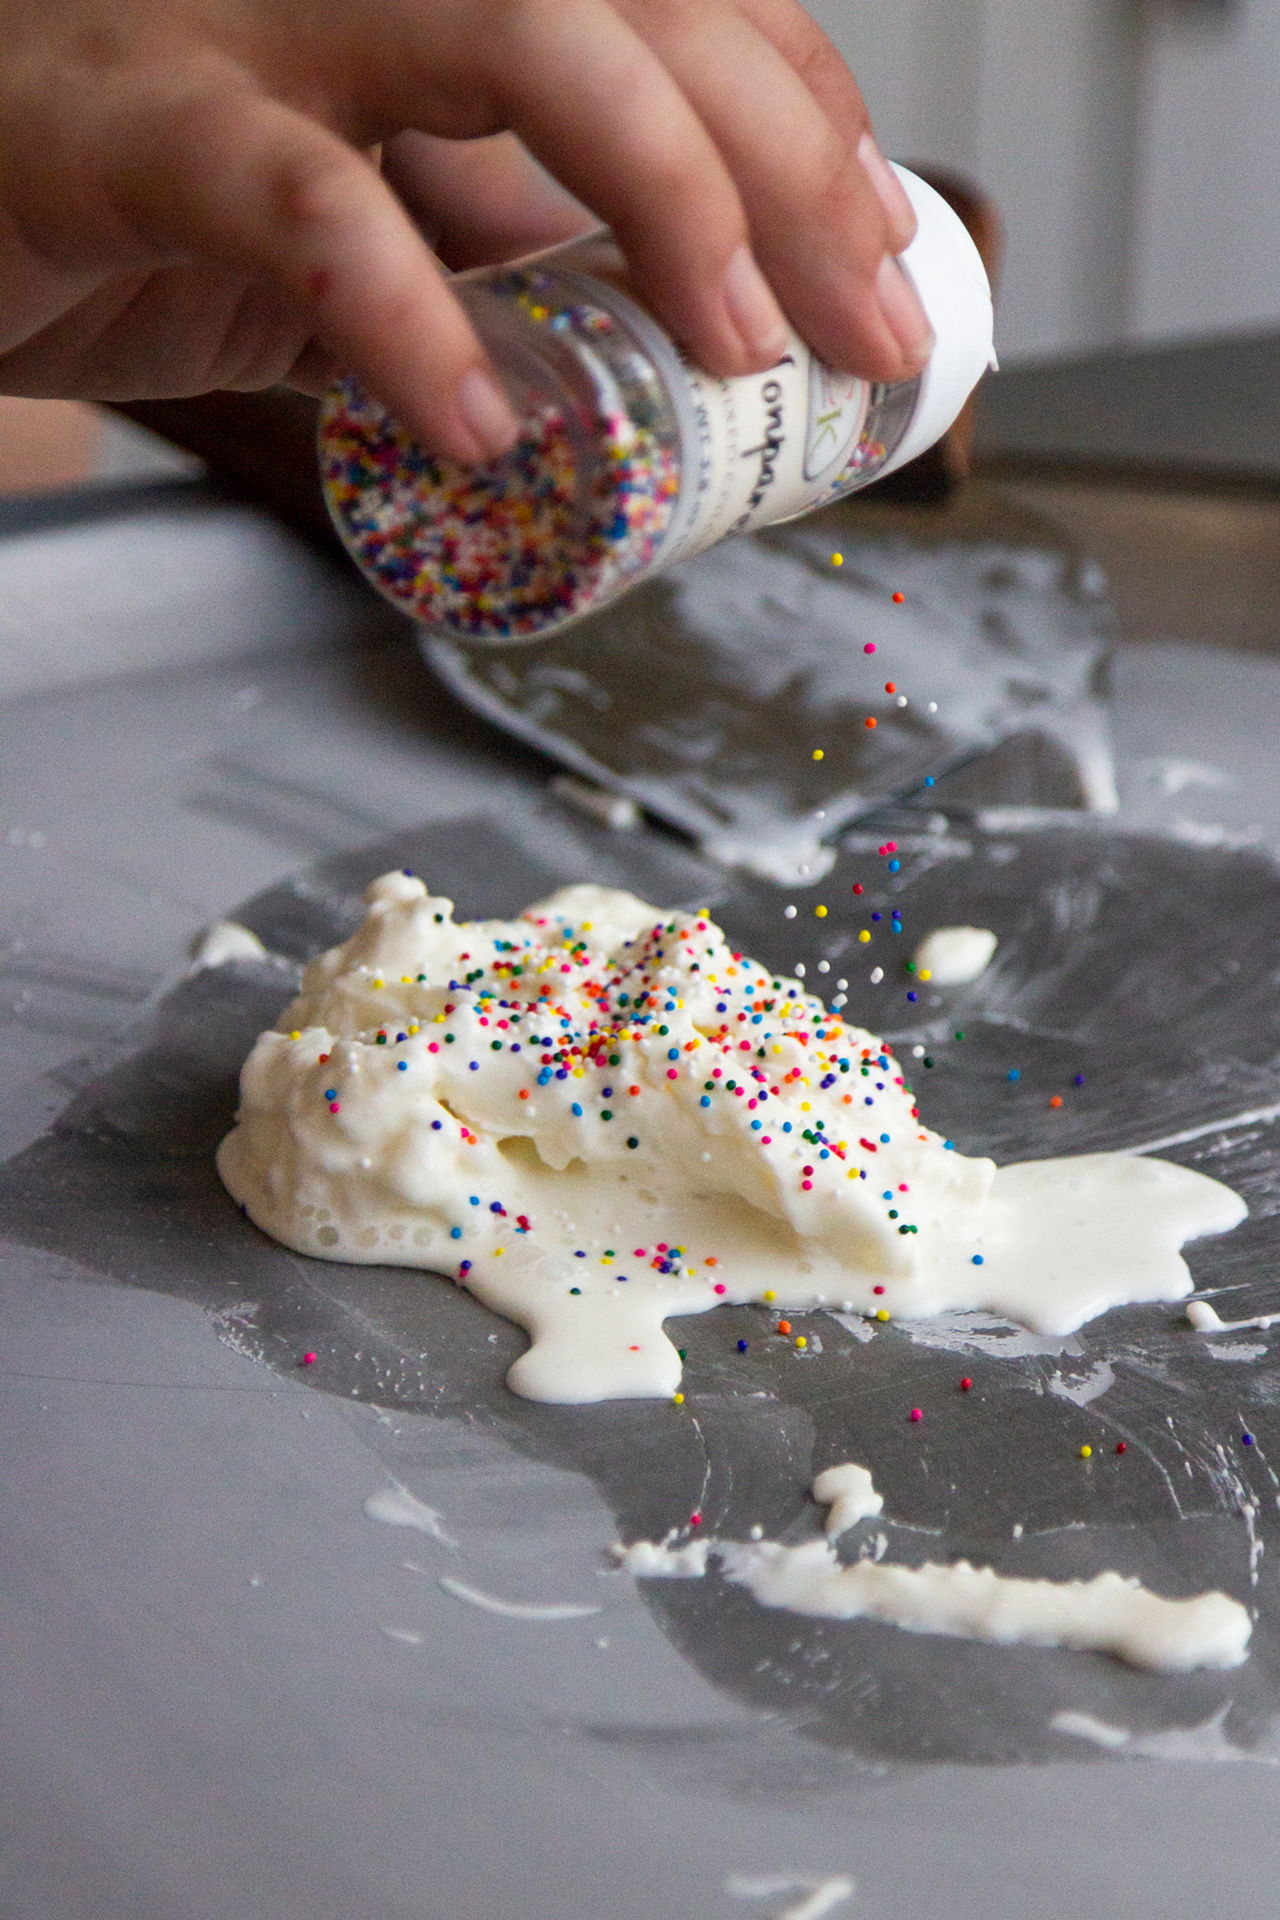 Sprinkles going into the Birthday Cake rolled ice cram